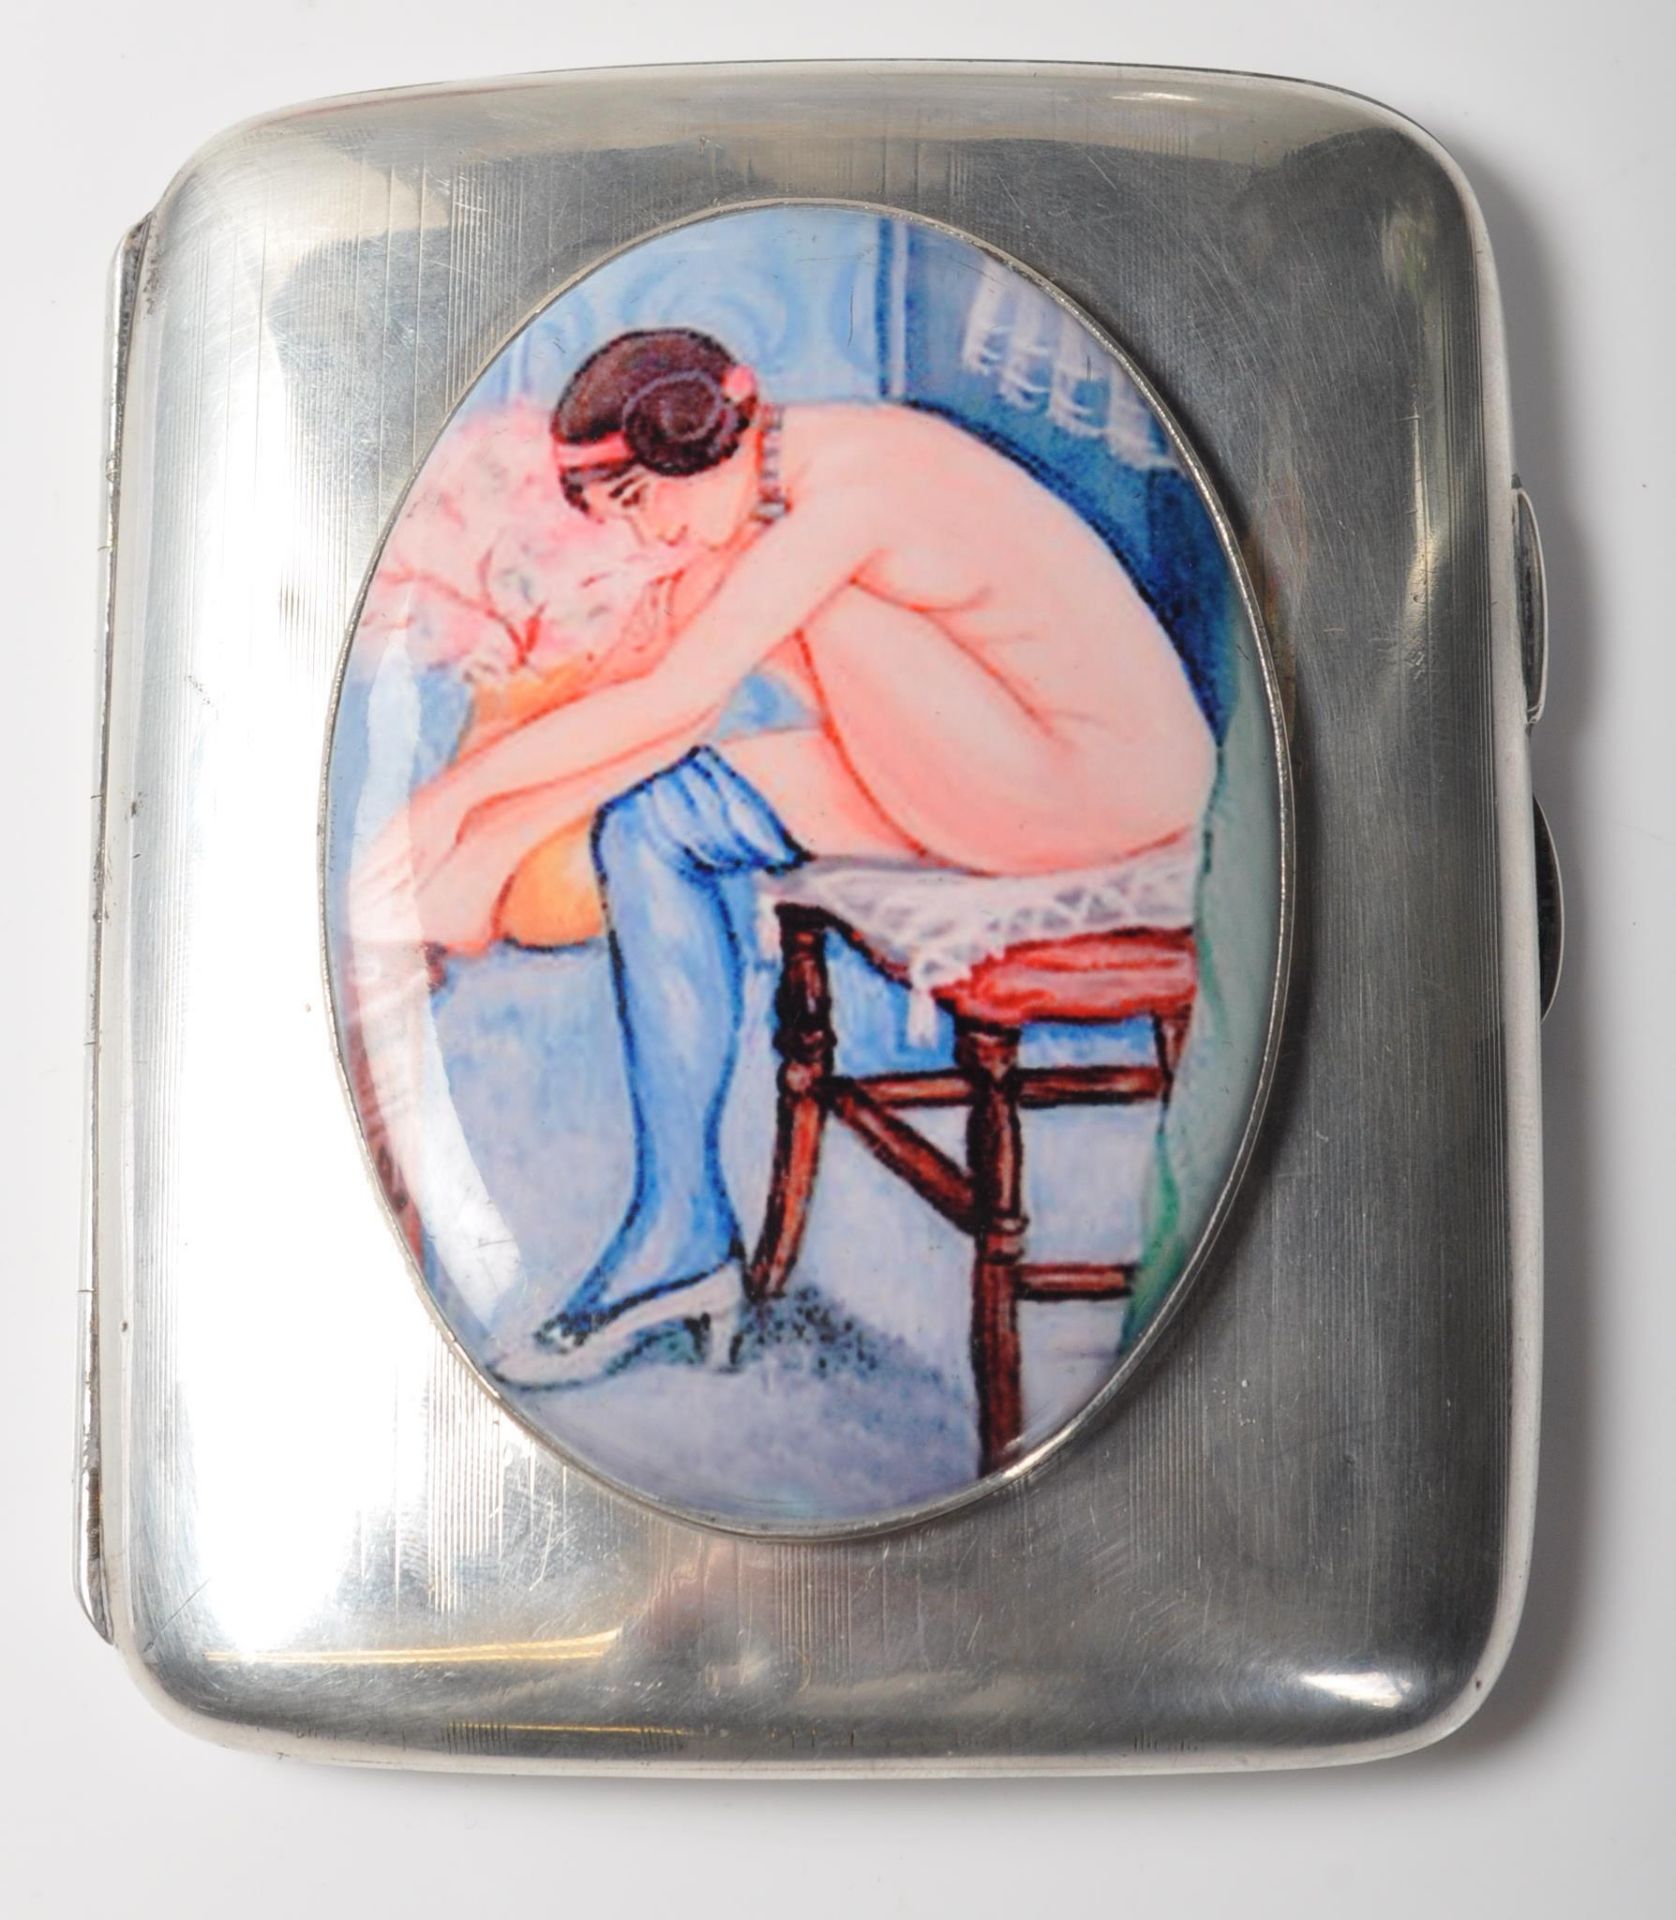 ANTIQUE STERLING SILVER CIGARETTE CASE WITH NUDE ENAMEL PANEL